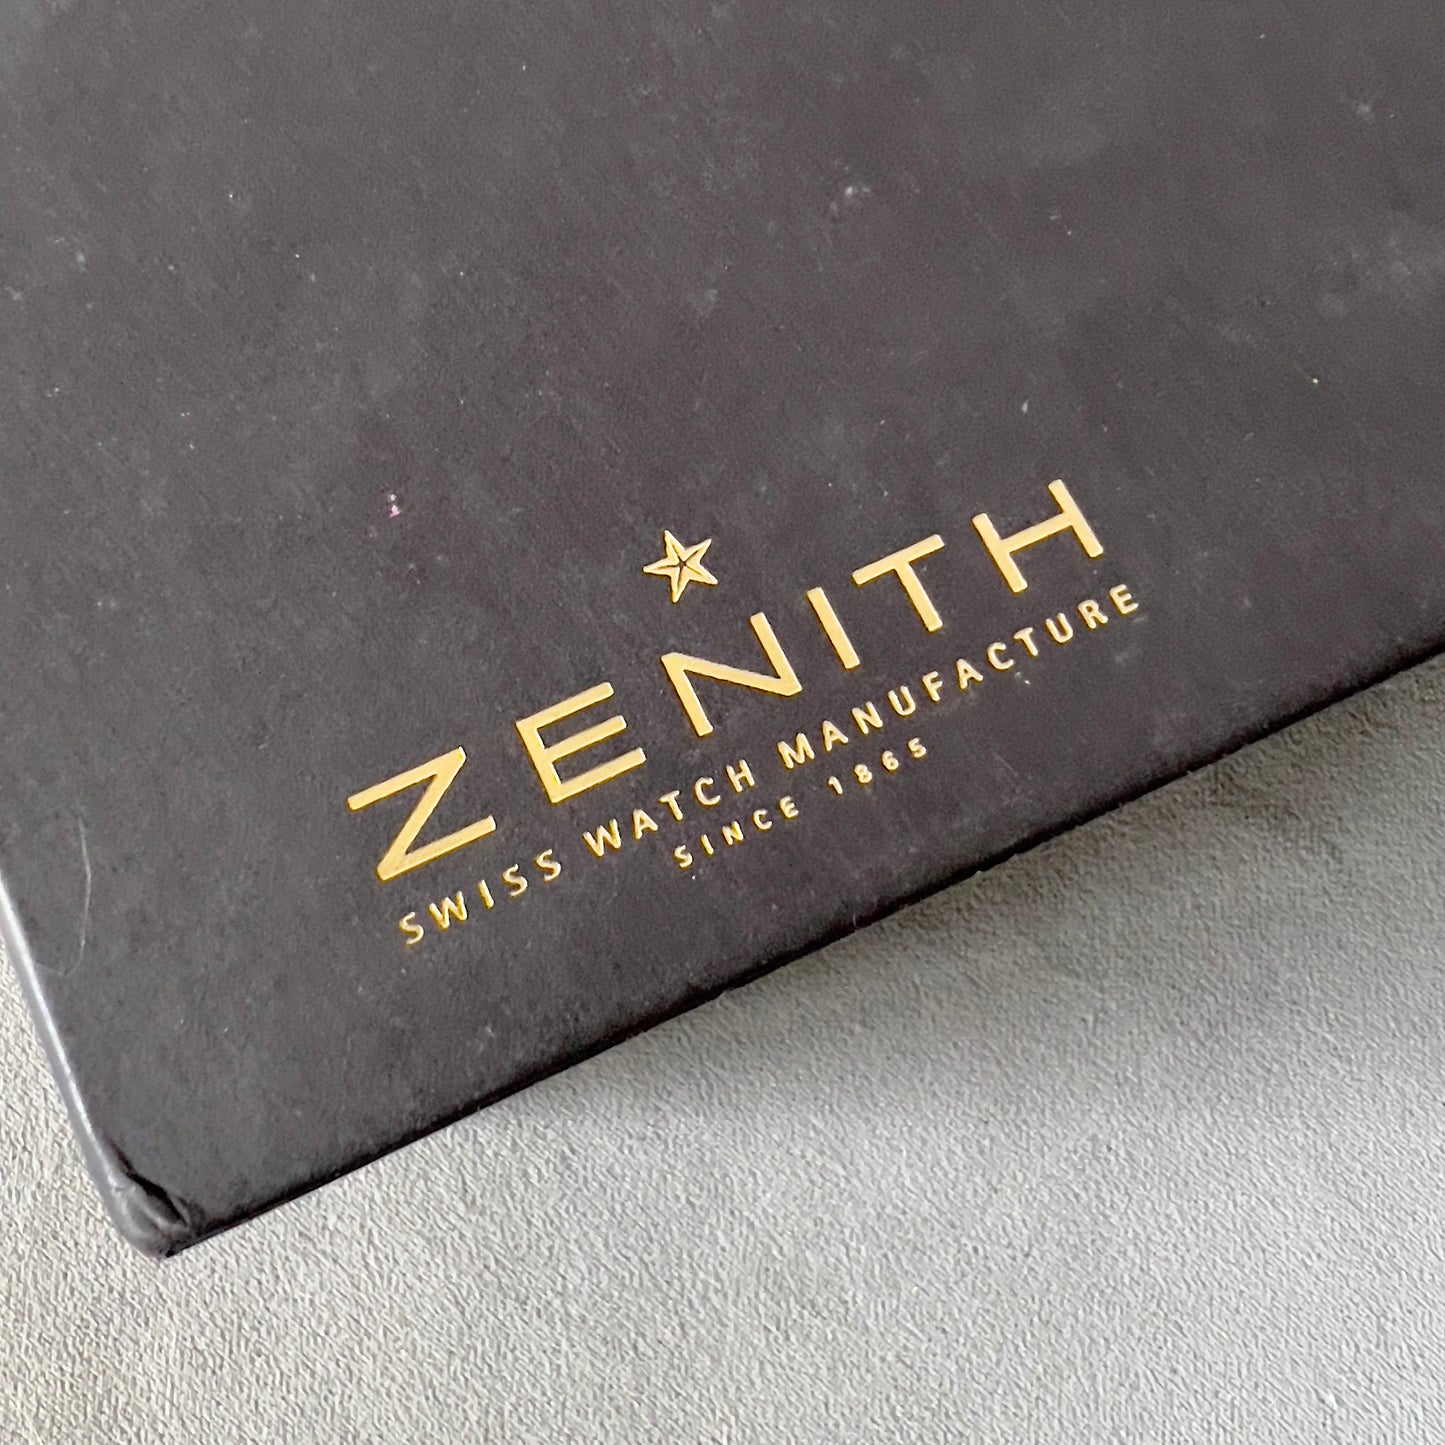 ZENITH Brown Wooden Box + Outer Boxes